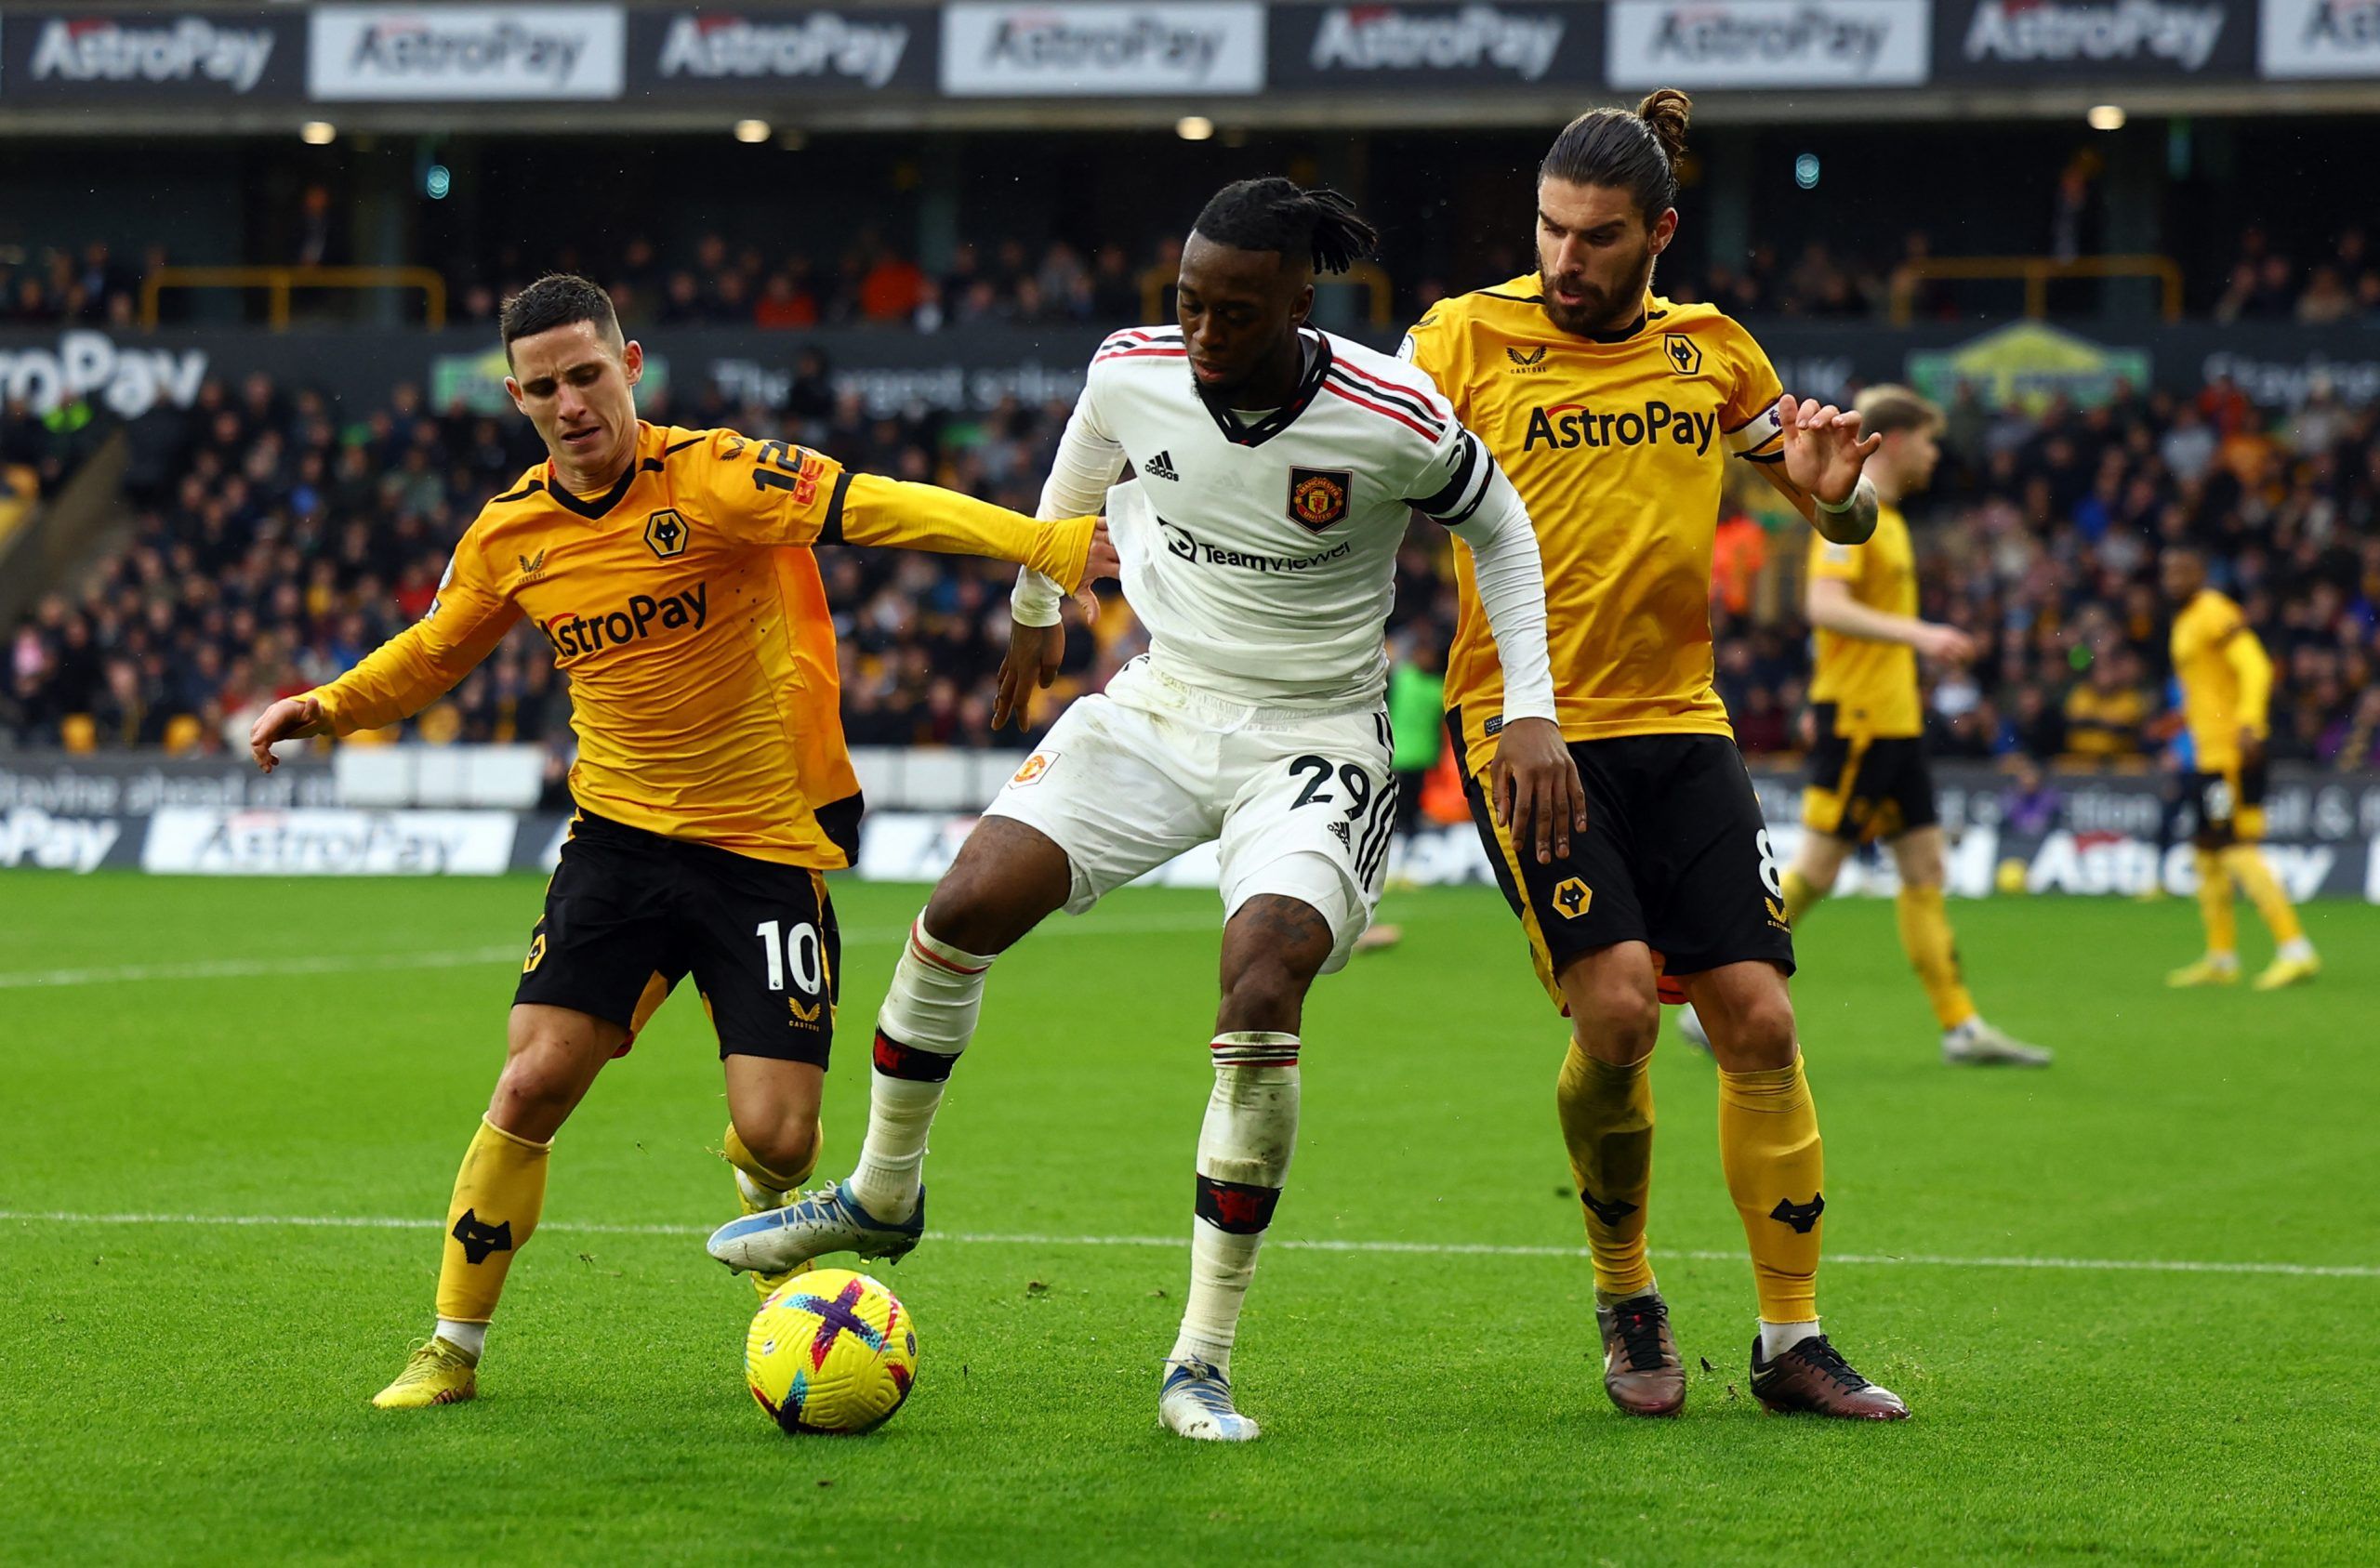 Soccer Football - Premier League - Wolverhampton Wanderers v Manchester United - Molineux Stadium, Wolverhampton, Britain - December 31, 2022 Manchester United's Aaron Wan-Bissaka in action with Wolverhampton Wanderers' Daniel Podence and Ruben Neves REUTERS/Molly Darlington EDITORIAL USE ONLY. No use with unauthorized audio, video, data, fixture lists, club/league logos or 'live' services. Online in-match use limited to 75 images, no video emulation. No use in betting, games or single club /lea